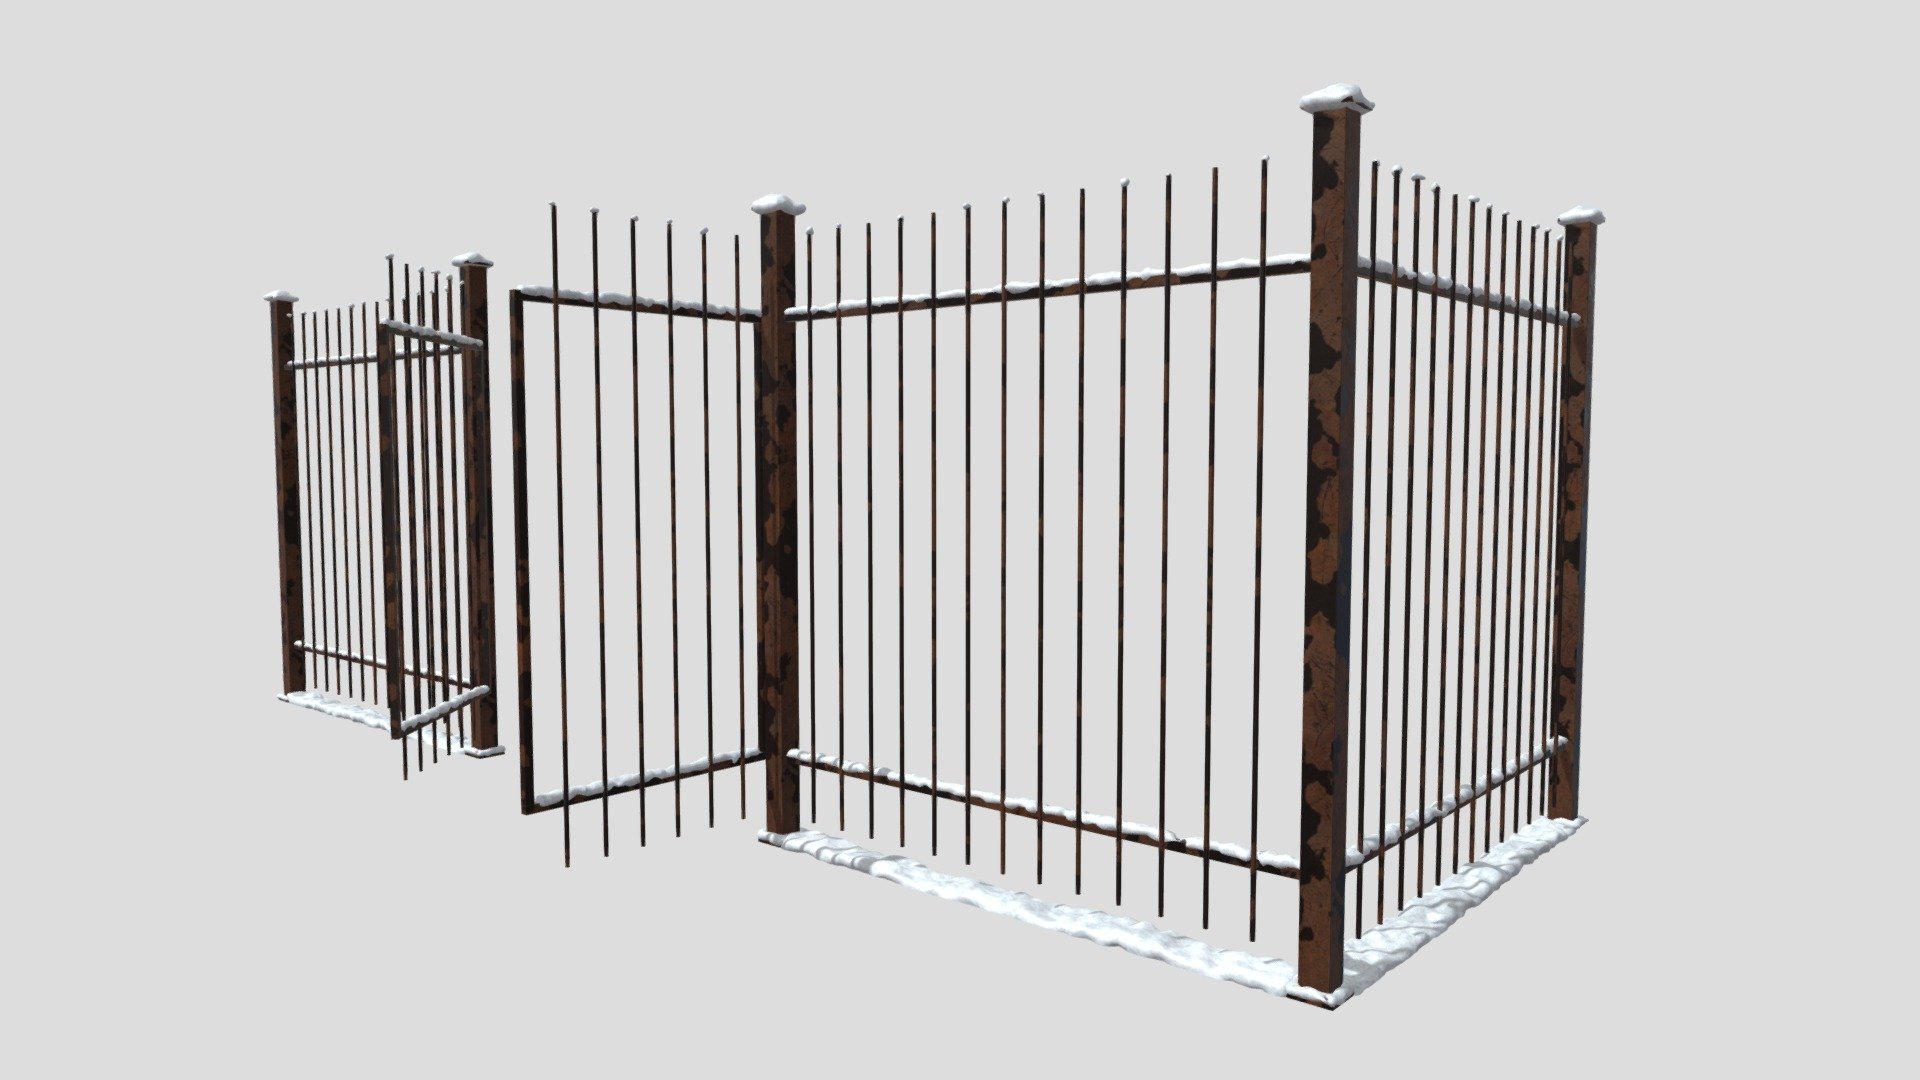 Tall fence with a corner and a gate covered with a layer of snow for winter outdoor scenes and more. This is a Rusty metal type of fences with snow.

All textures and materials are included and mapped in every format. The model is completely ready for use visualization in any 3d software and engines that support any of the formats described below.

Technical details:




File Size: 37,0 MB

File formats included in the package are: FBX | OBJ | 3DS | MAX





Additional 3ds Max Files: Corona Renderer | V-Ray | Standart




High quality PBR textures: 8192x8192px resolution




Tall Fence: vertex count ~9k, ~8k quad polygons




Snow Cover: vertex count ~33k, ~32k quad polygons




Total: Quads 40.4k, triangles 81.1k




Textures: Base_Color, Metallic, Roughness, Normal, Height




Dimensions of Tall Fence: 449x222x163cm



I wish you all the best! And good luck with your renders! - English Fence | Snow-covered - 3D model by pactakt 3d model